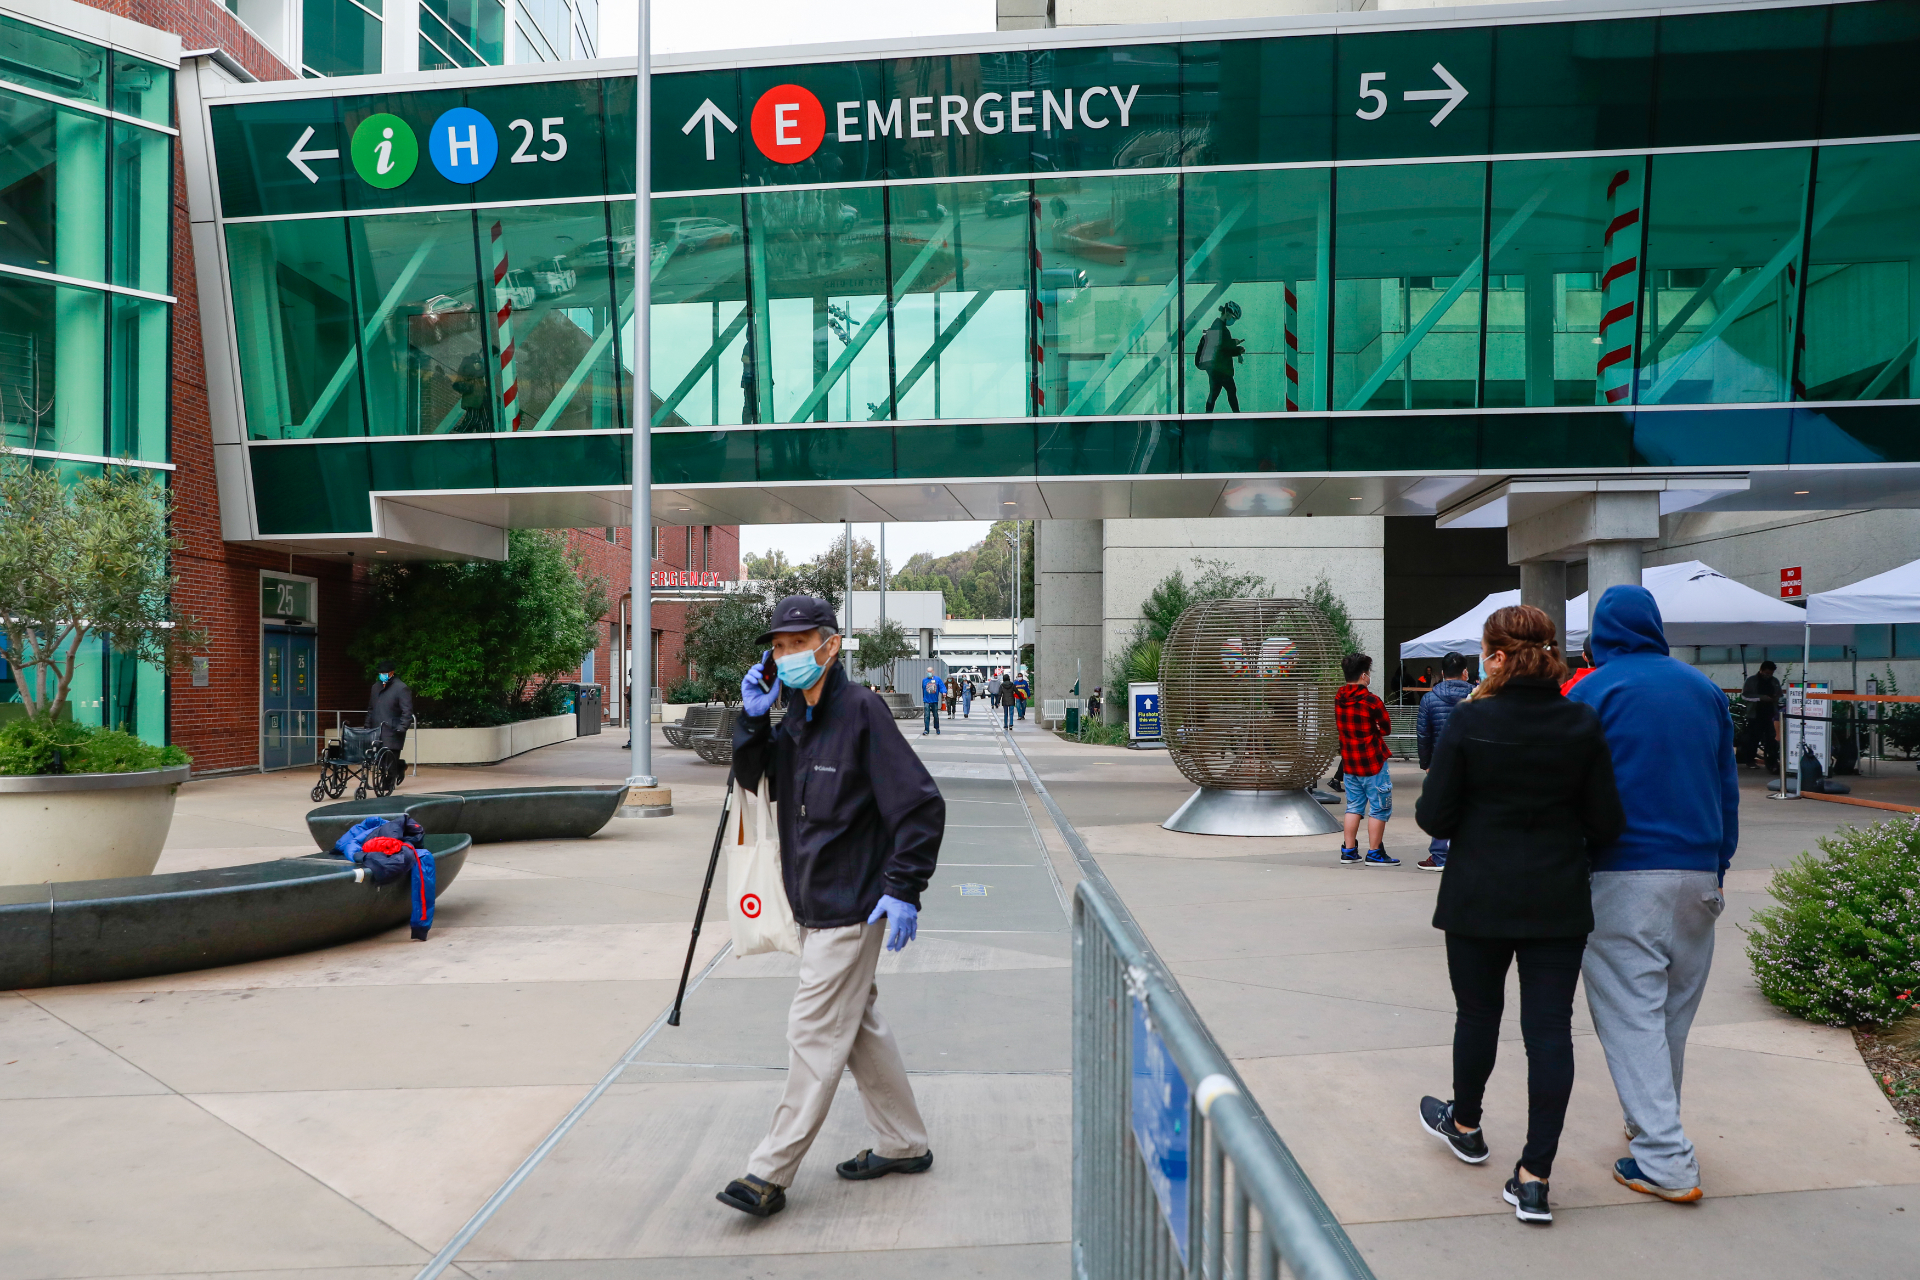 A hospital walkway is seen at the top of the frame as people walk through the area in front of San Francisco General Hospital in the foreground.